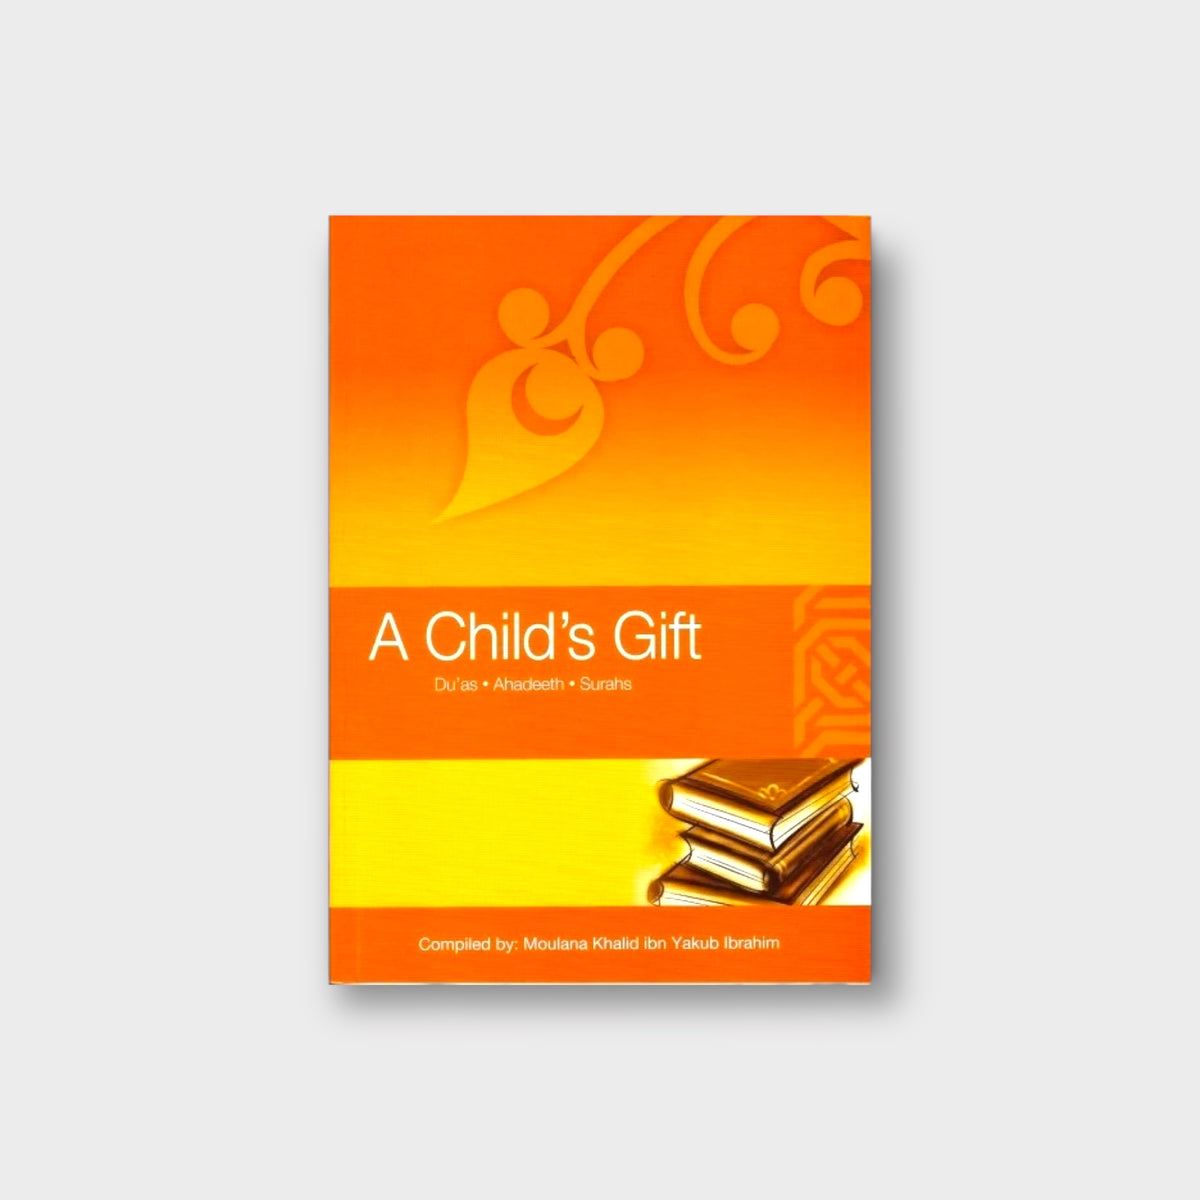 A Child’s Gift